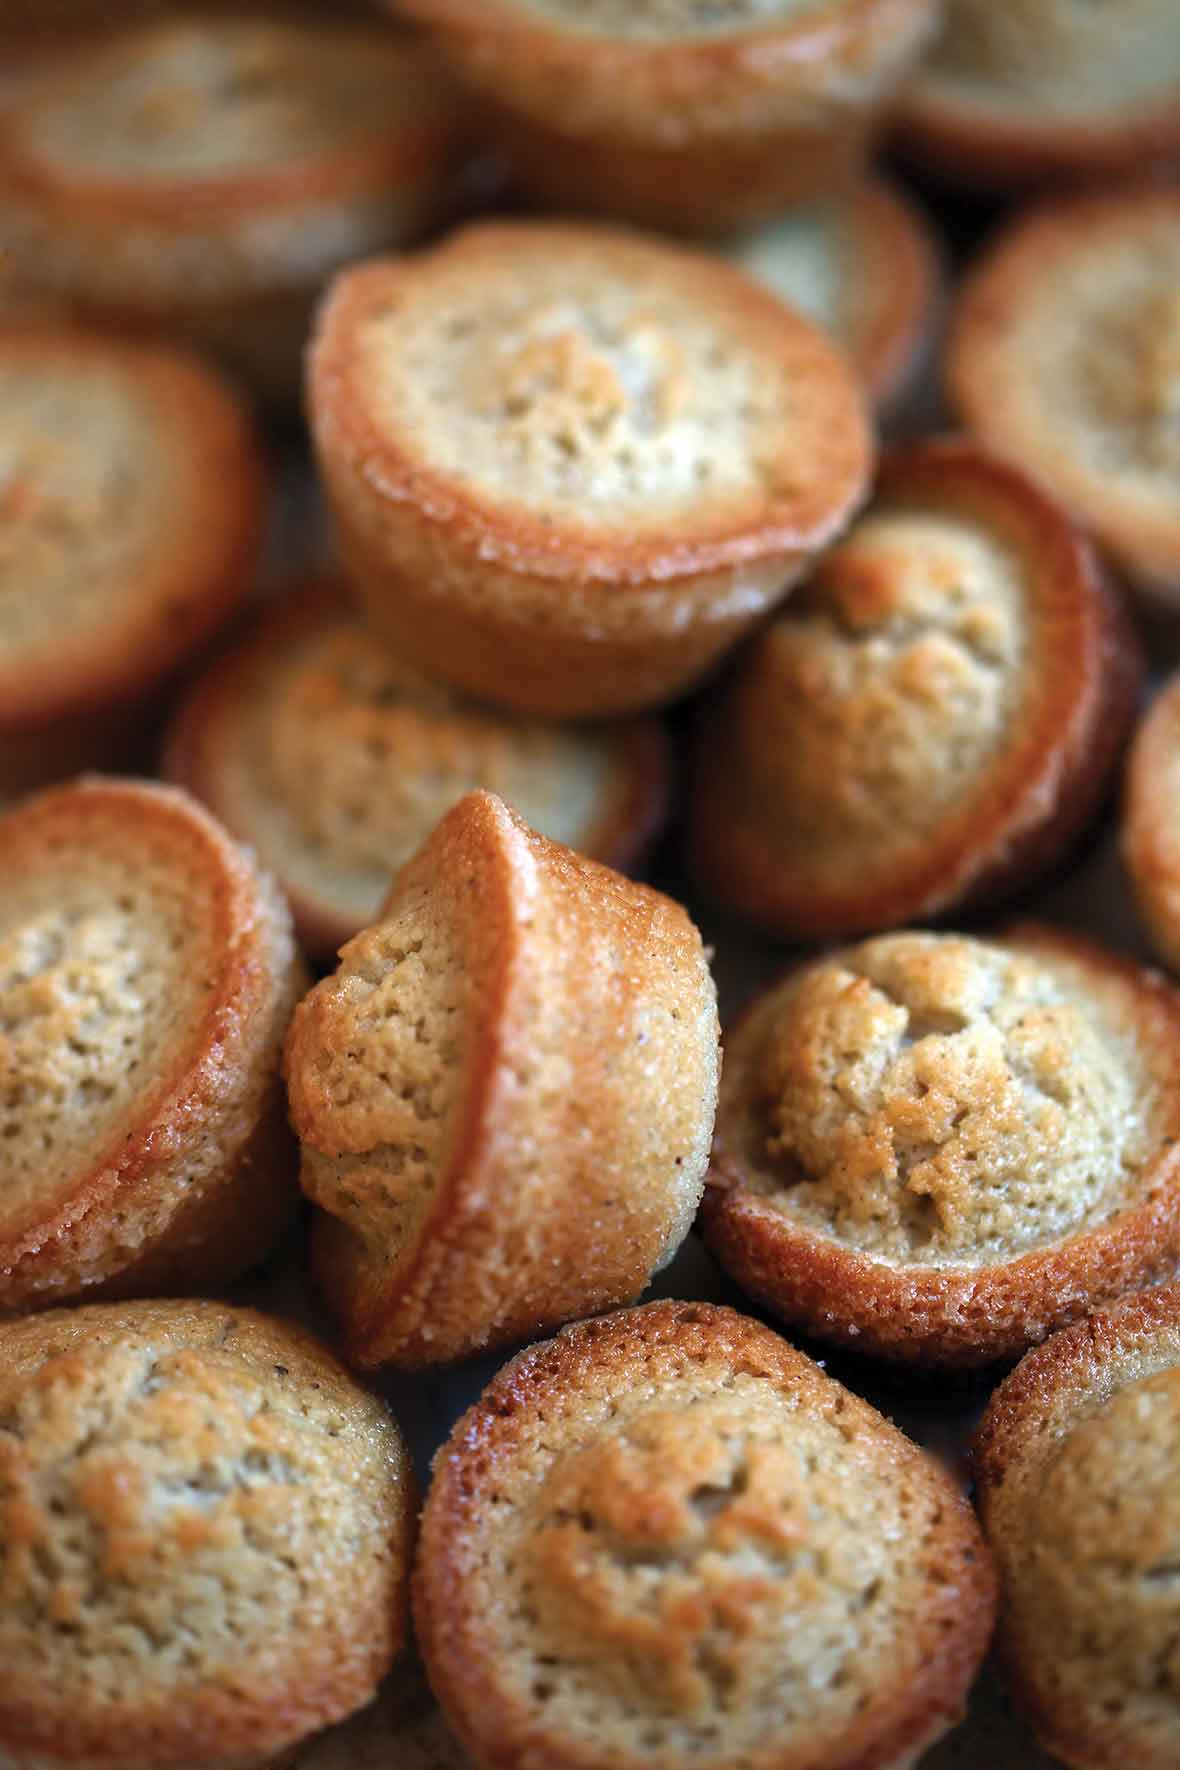 A pile of brown butter financiers baked in mini muffin molds.